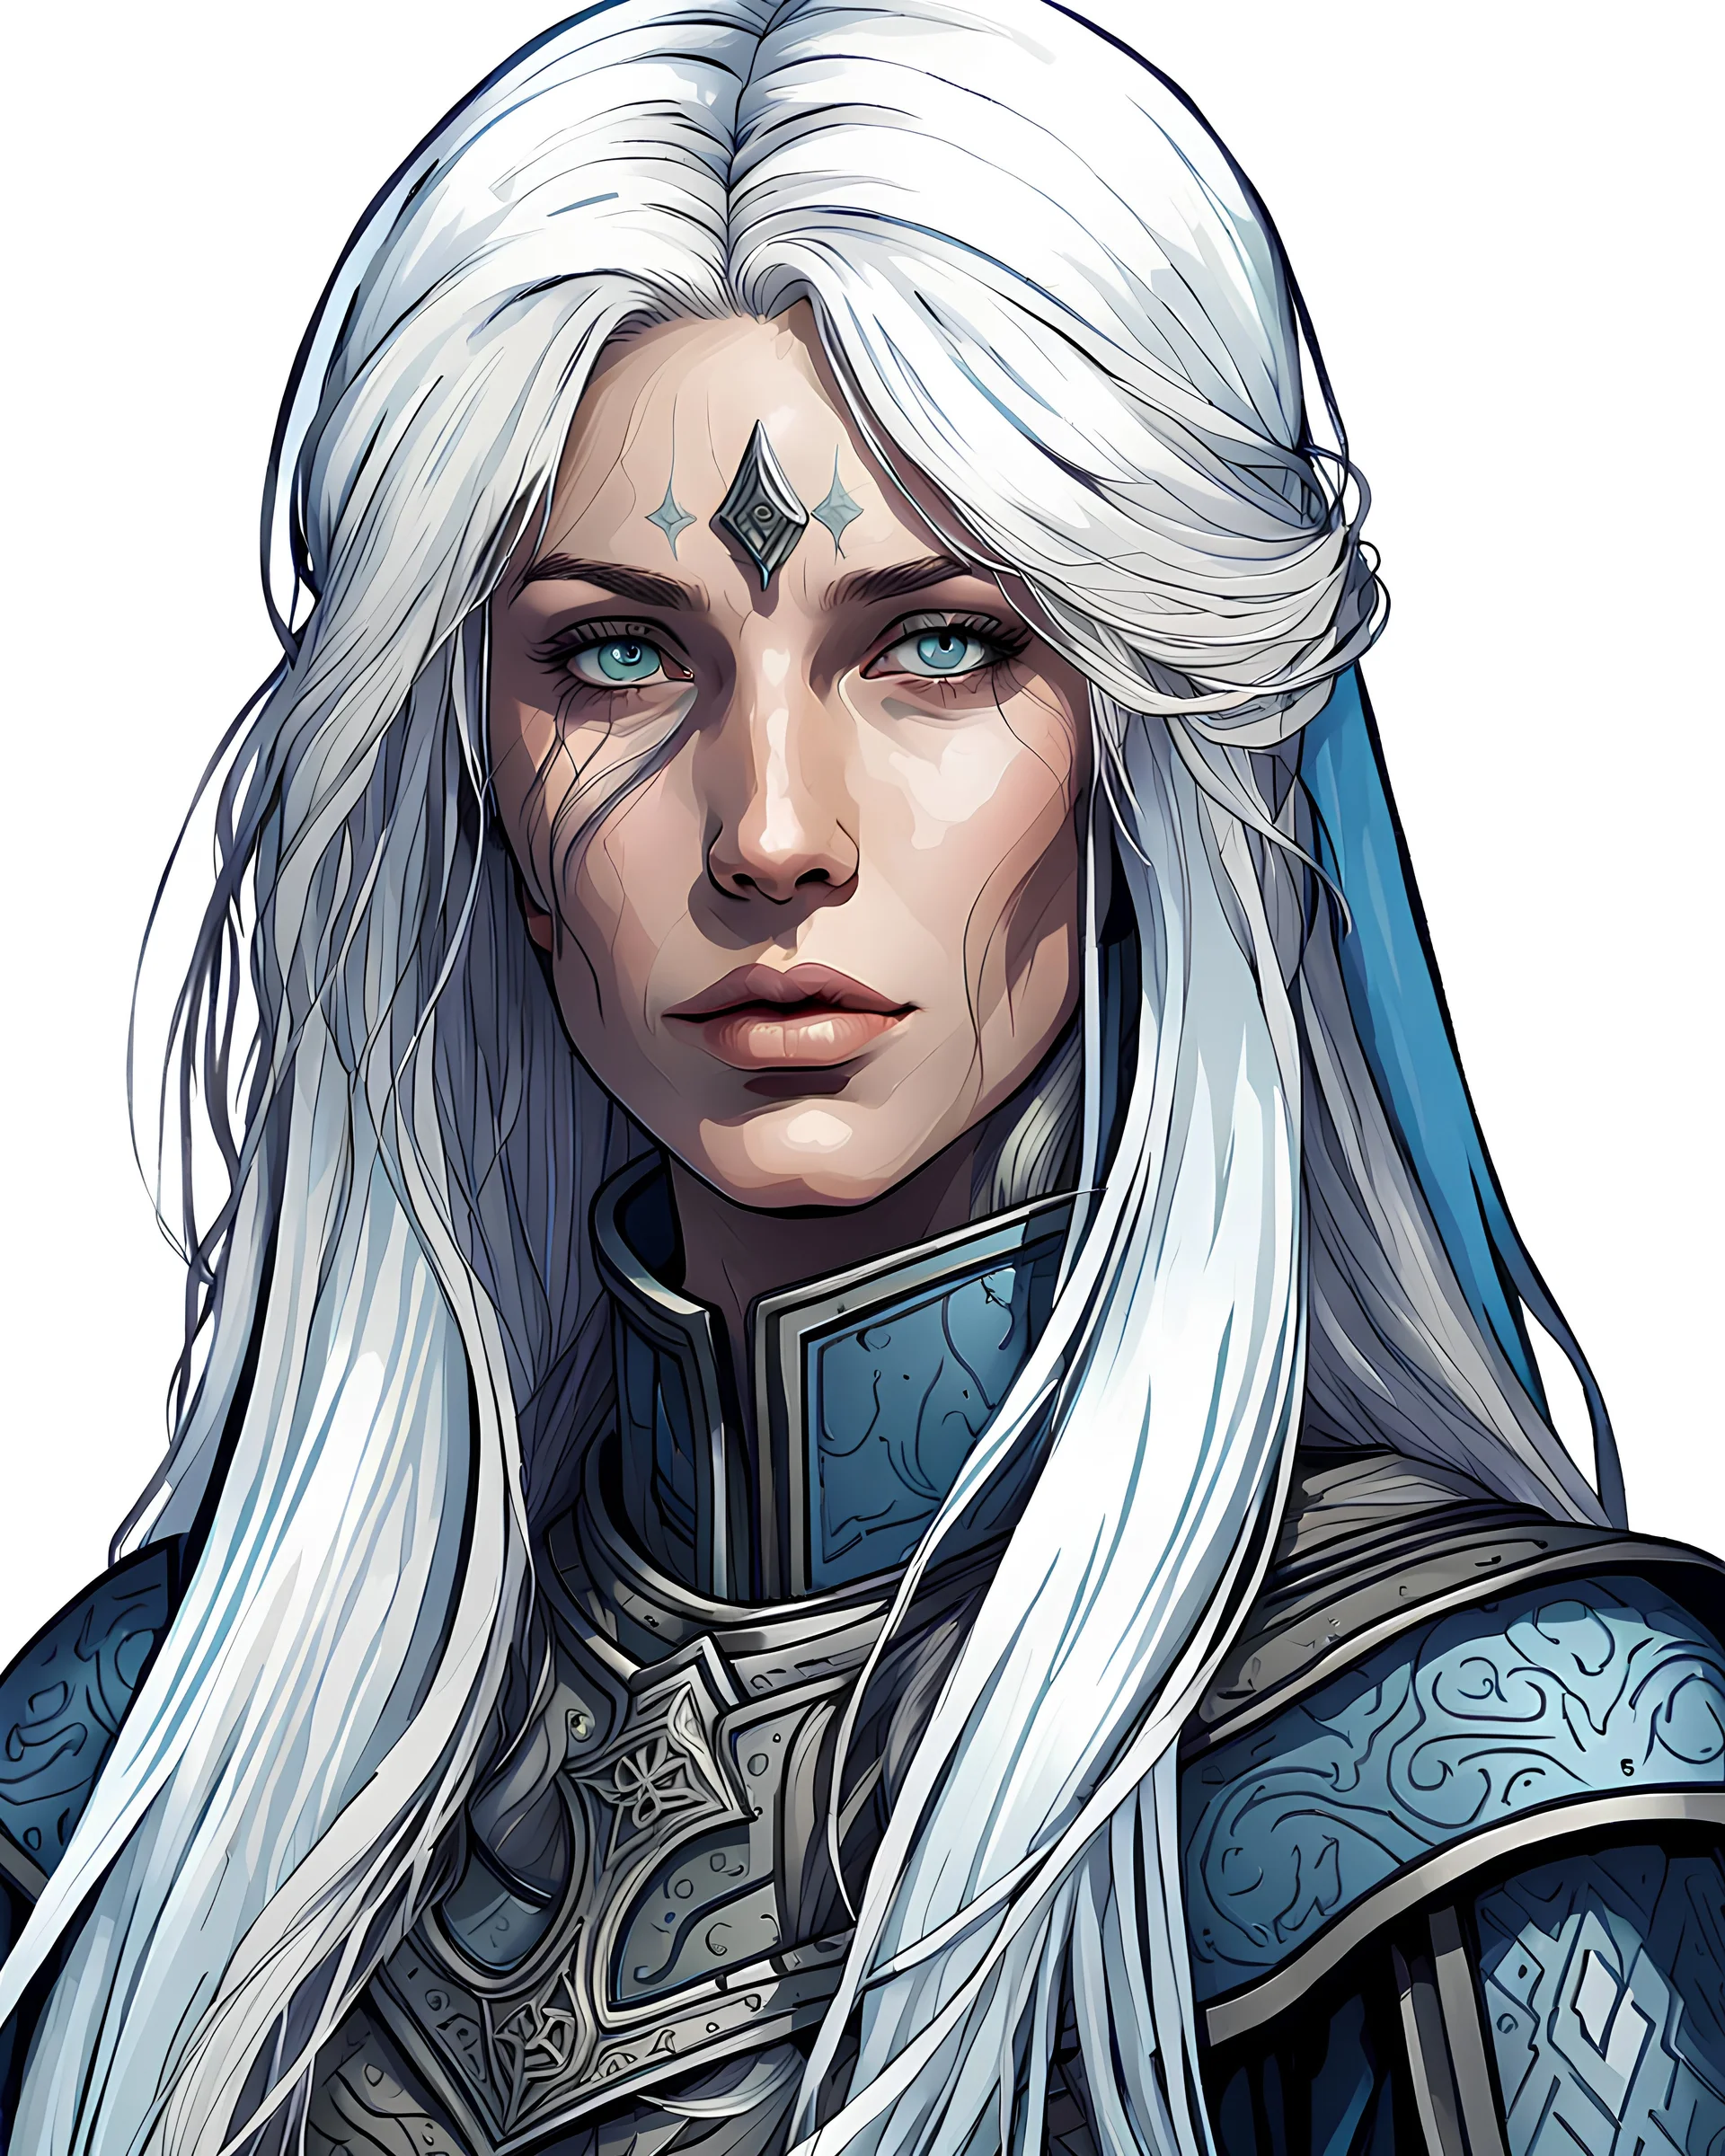 beautiful nordic stoic woman dressed as an inquisitor. she has white long hair and light blue eyes. her right eye is blind and the right side of her face have a scar near her eye partially covered by her hair.